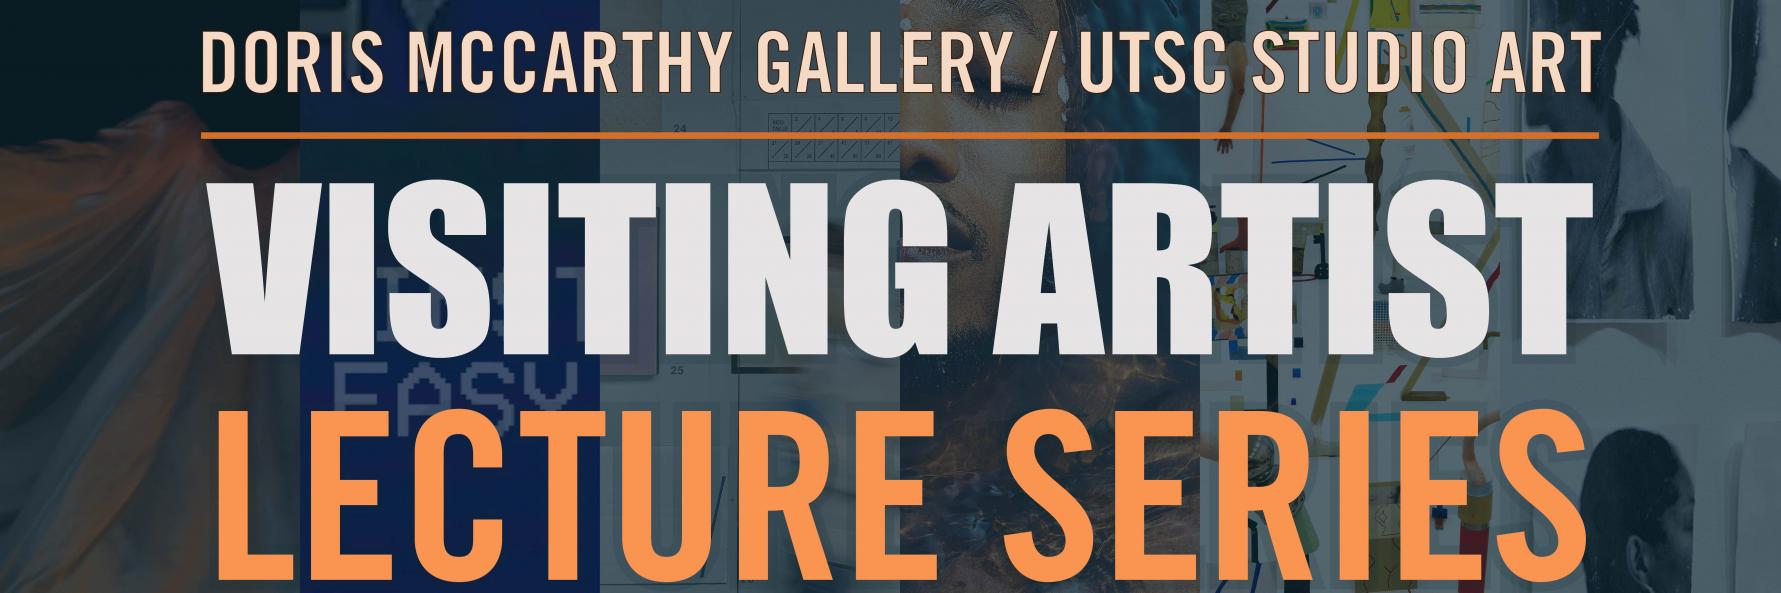 Visiting Artist Lecture Series Banner